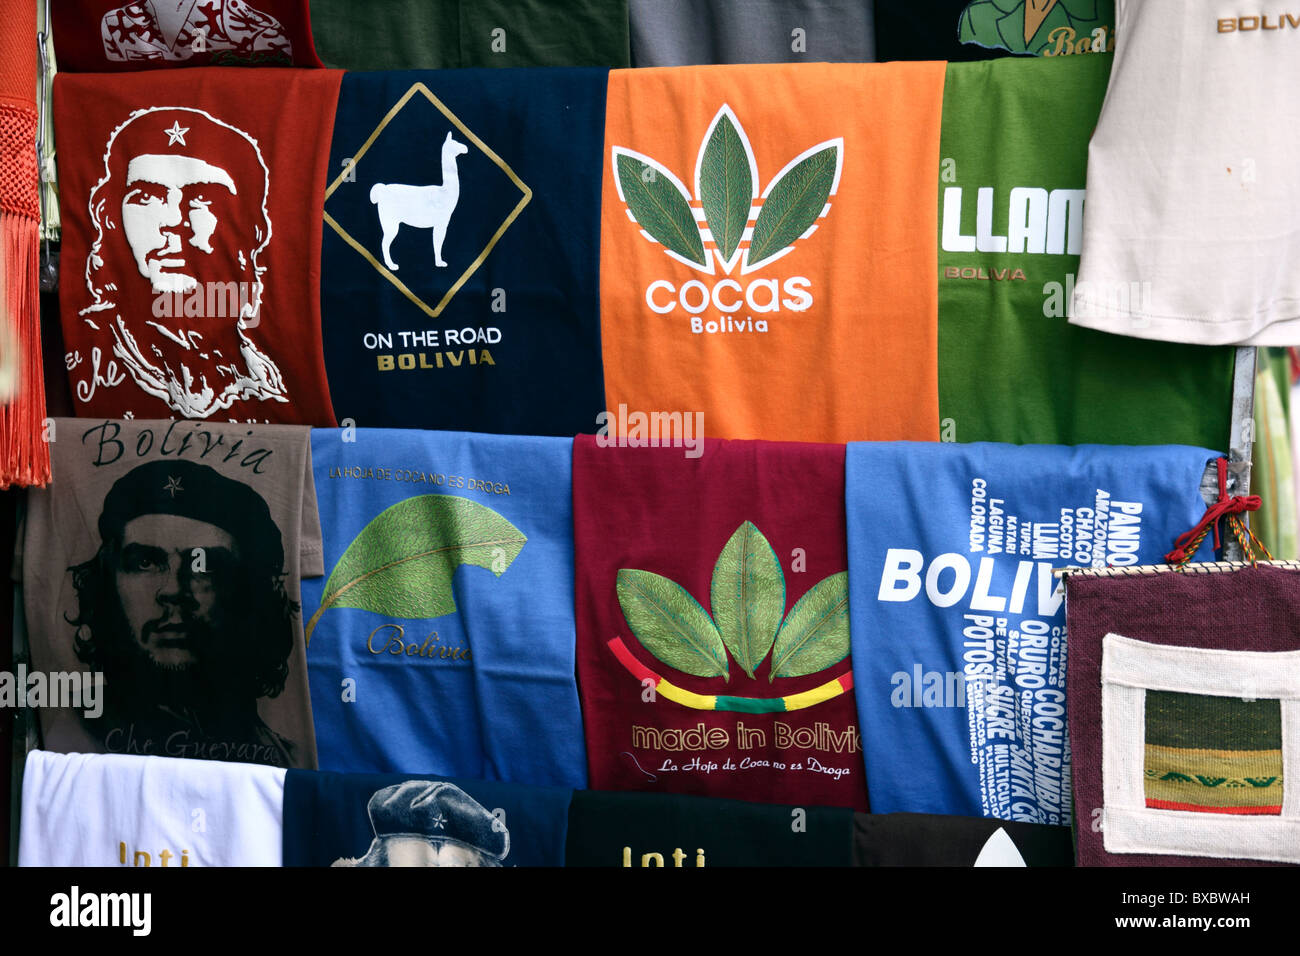 T-shirts with Che Guevara and coca leaves in form of Adidas logo for sale outside shop in tourist market, Calle Linares, La Paz, Bolivia Stock Photo